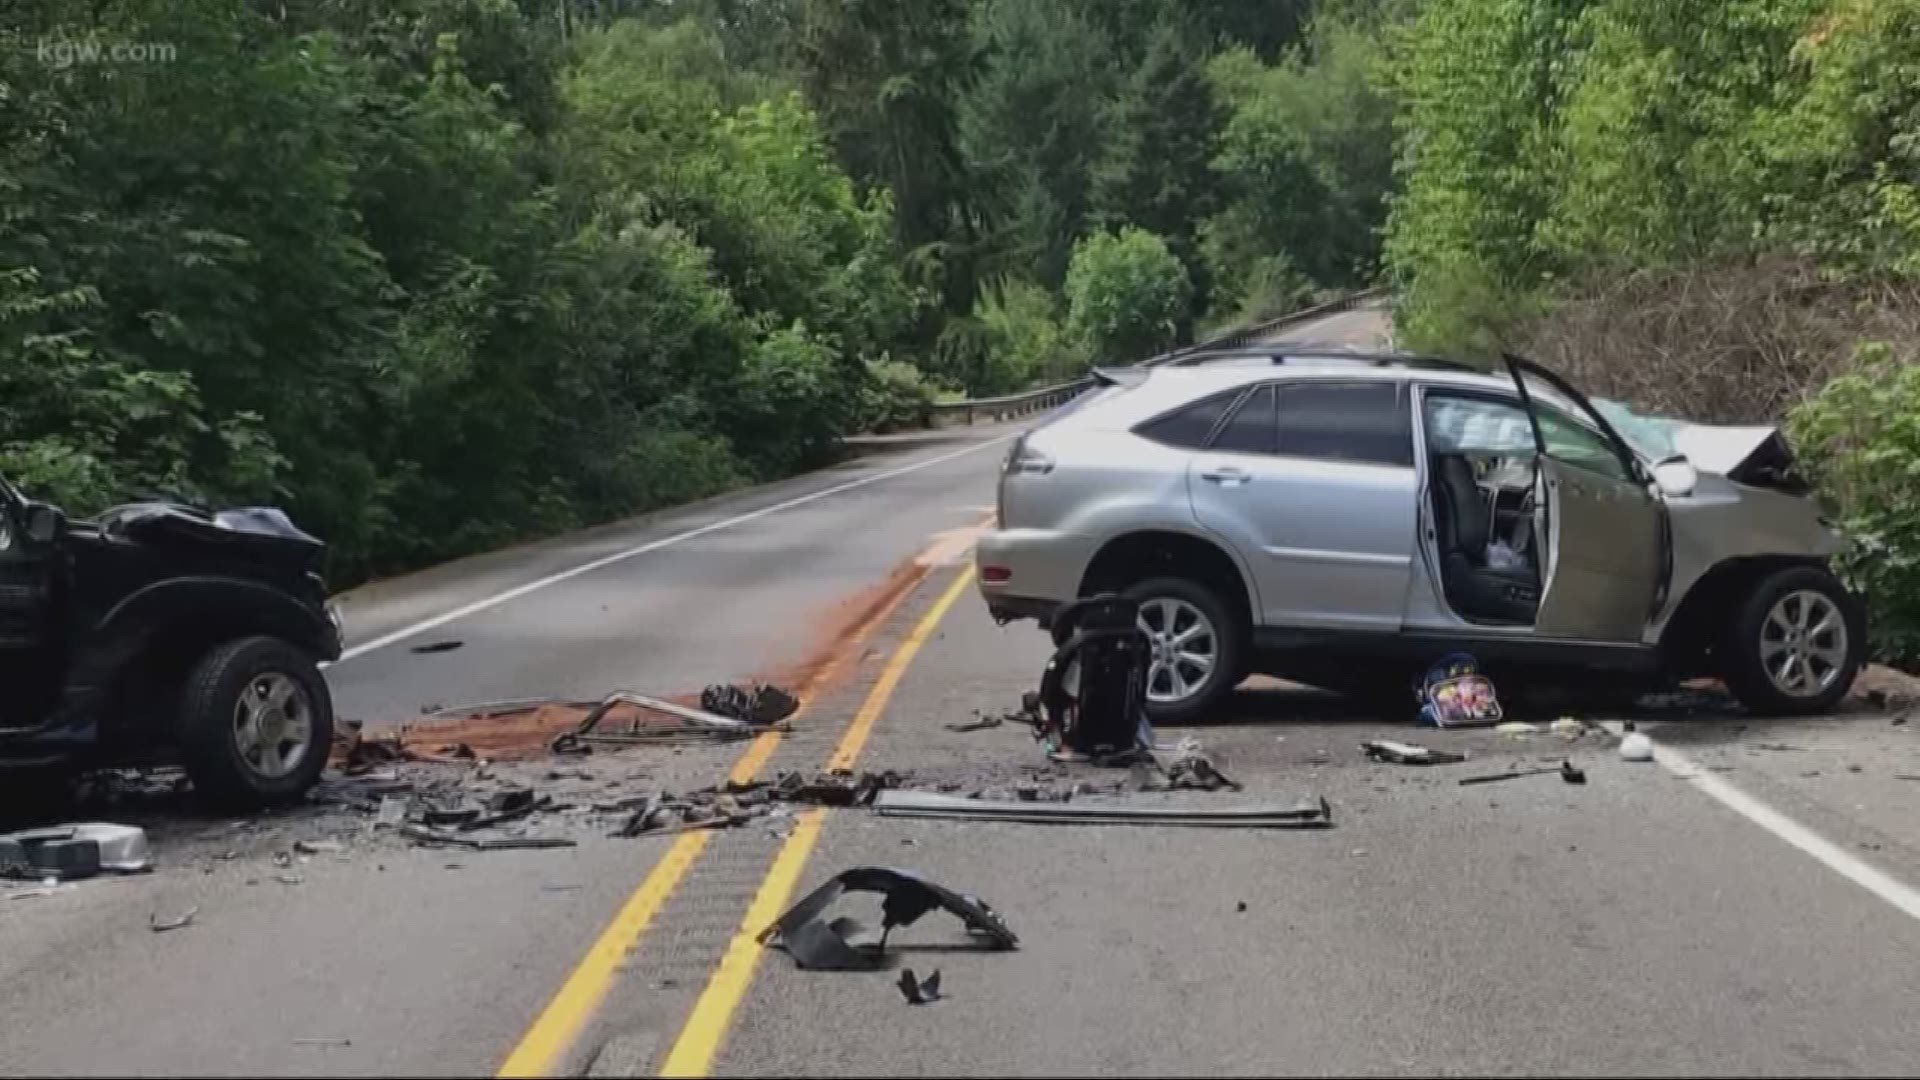 An Oregon City woman is dead and her young son hospitalized after a two-vehicle crash near Champoeg that also killed the other driver.